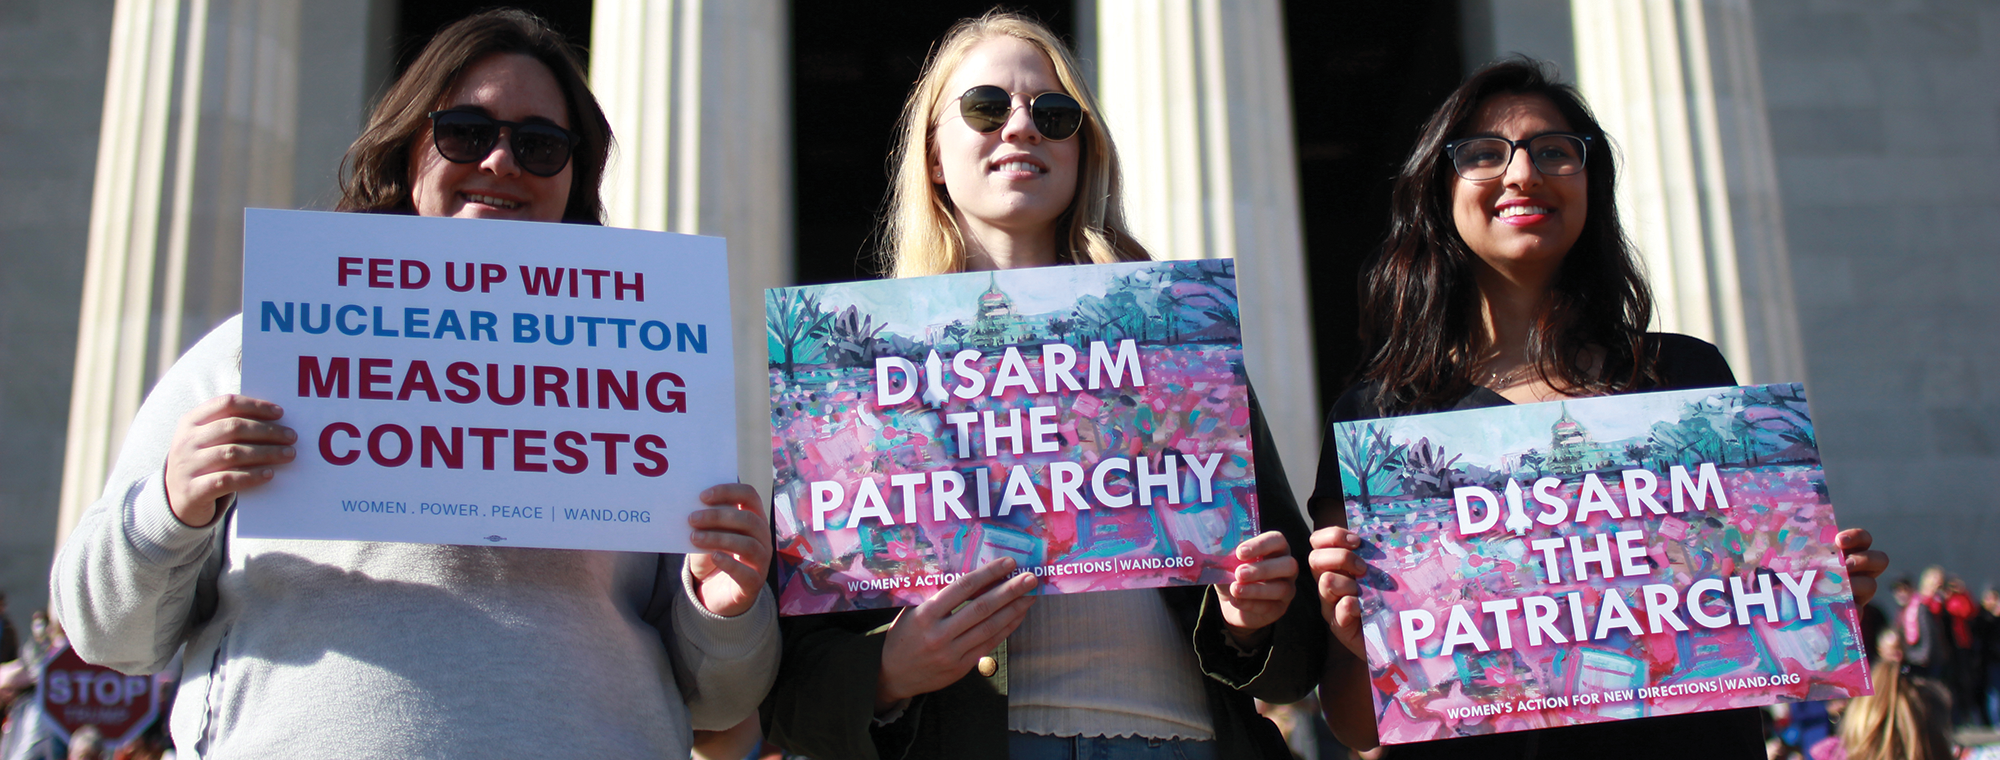 Women's Action for New Directions with 'Disarm the Patriarchy' signs at the 2018 Women's March, Washington, DC. Image: Corey Greer, WAND